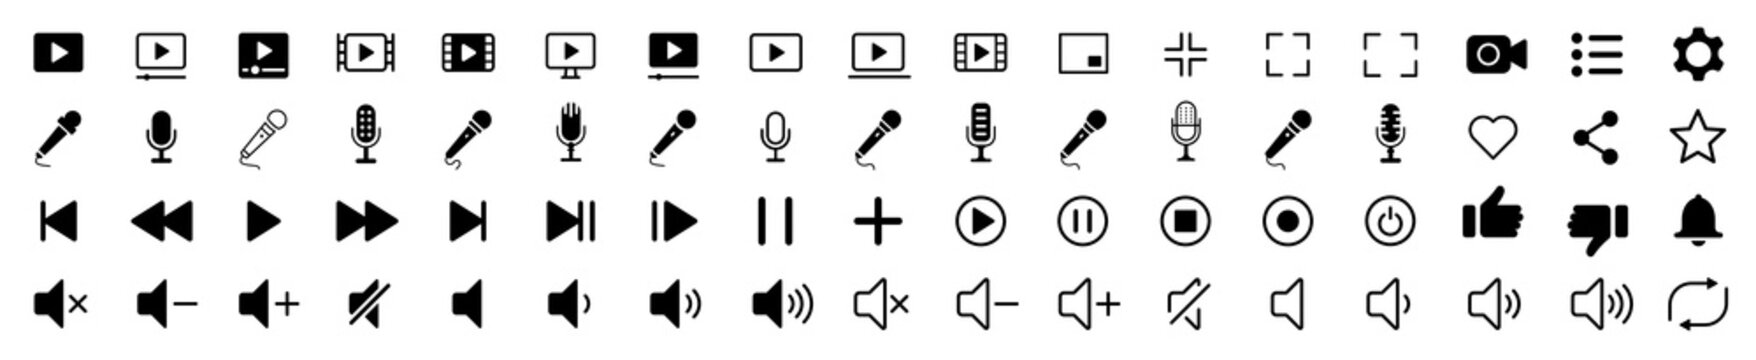 Media player icons set. Volume Collection of multimedia symbols and audio, music speaker volume, interface, design media player buttons. Play, pause, stop. Vector illustration